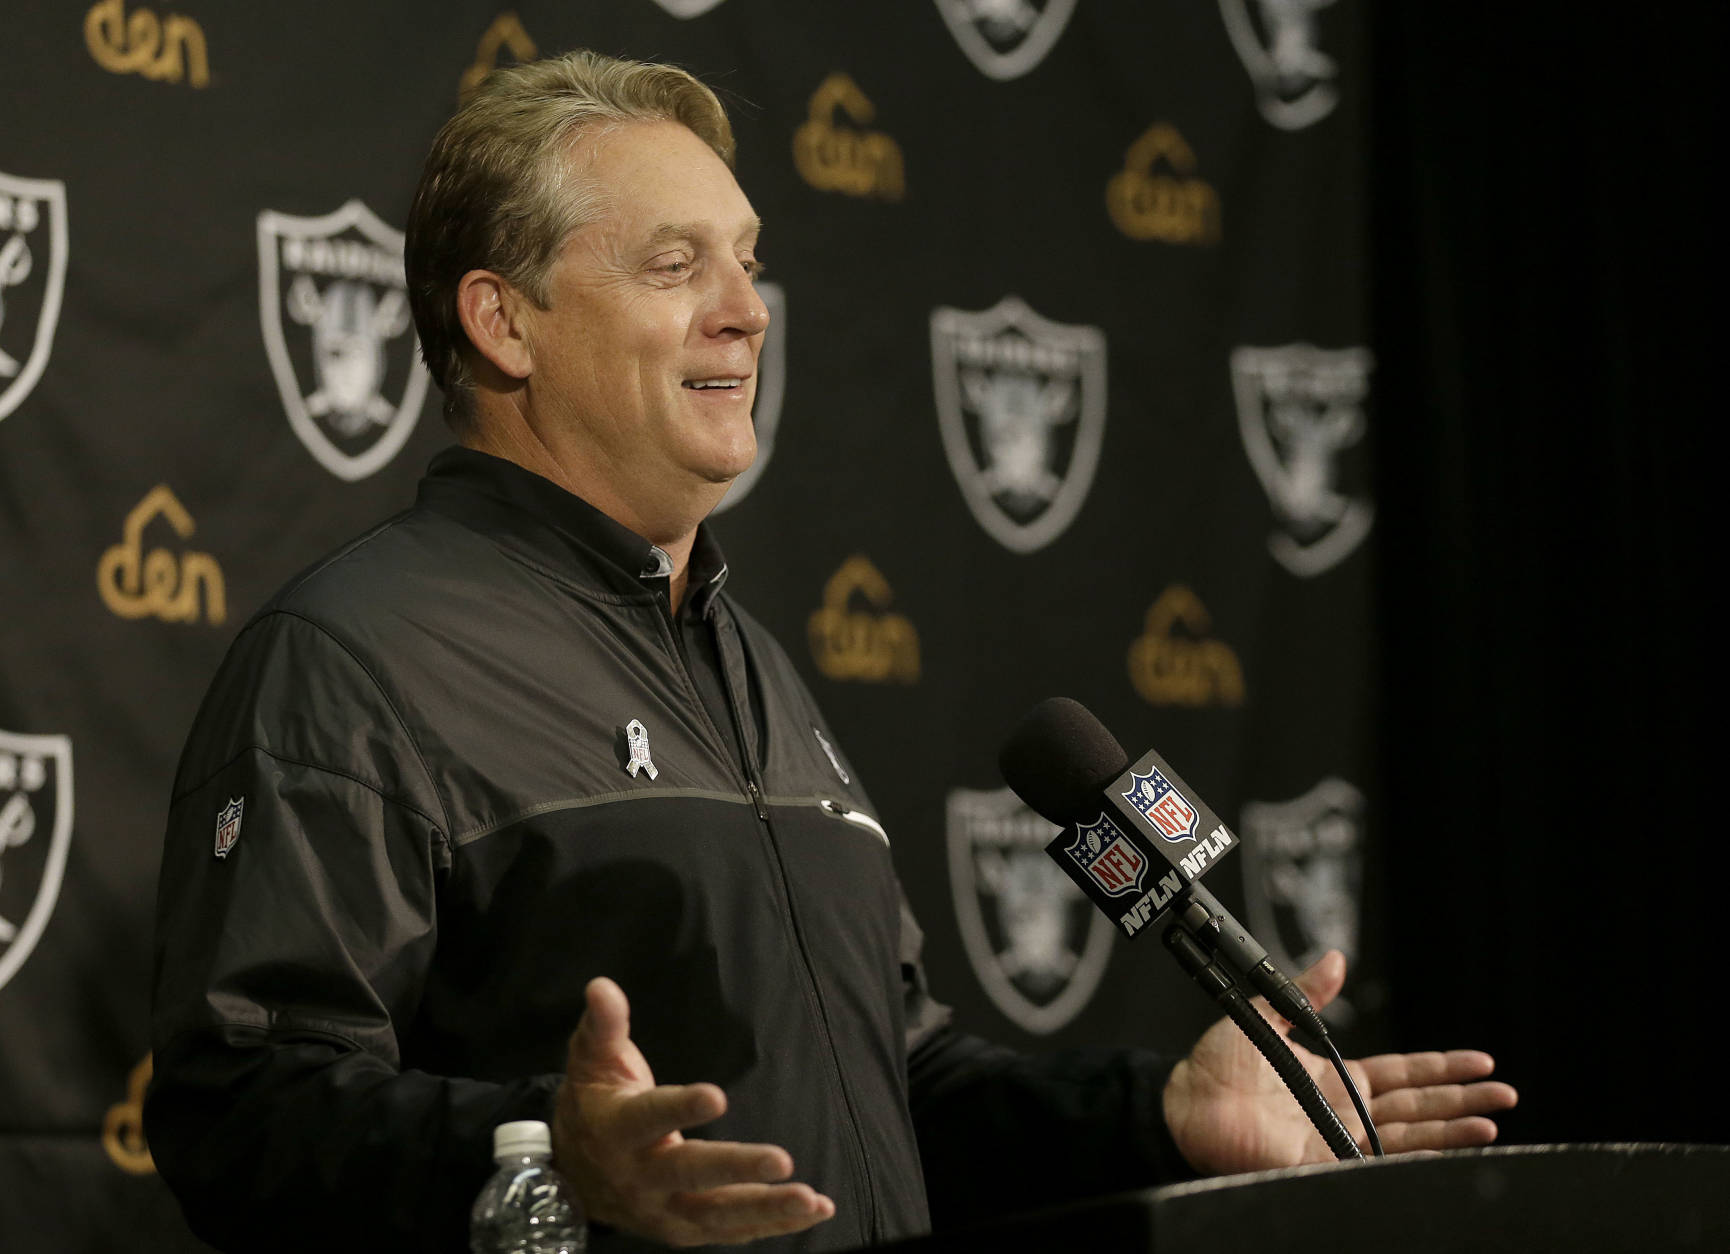 Oakland Raiders head coach Jack Del Rio speaks at a news conference after an NFL football game against the Denver Broncos in Oakland, Calif., Sunday, Nov. 6, 2016. (AP Photo/Ben Margot)